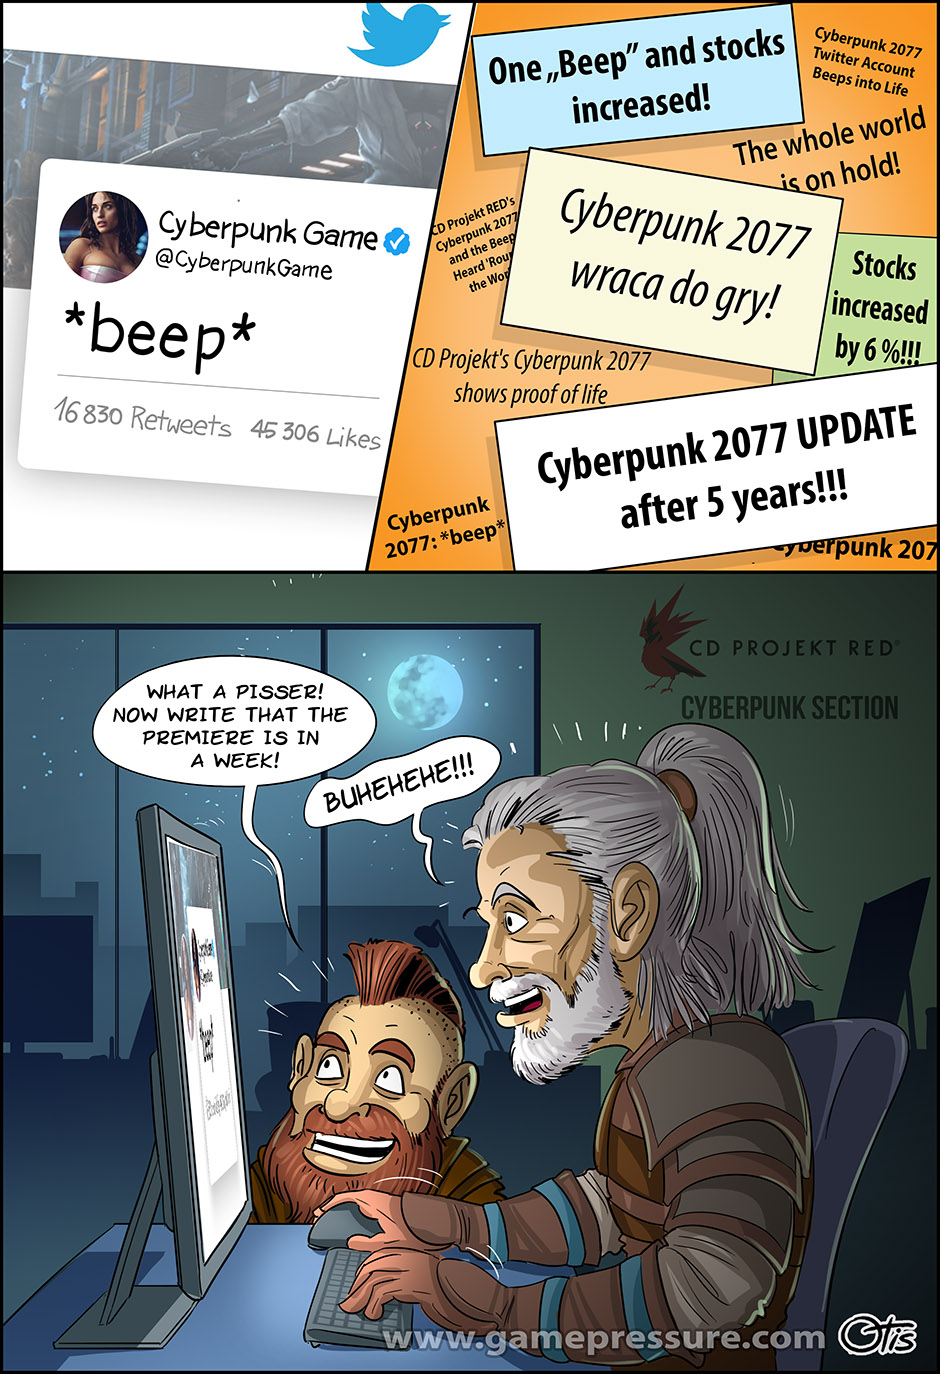 Who sent the *beep* from Cyberpunk?!, comics Cartoon Games, #230. We've been waiting for so long to hear something about Cyberpunk 2077...